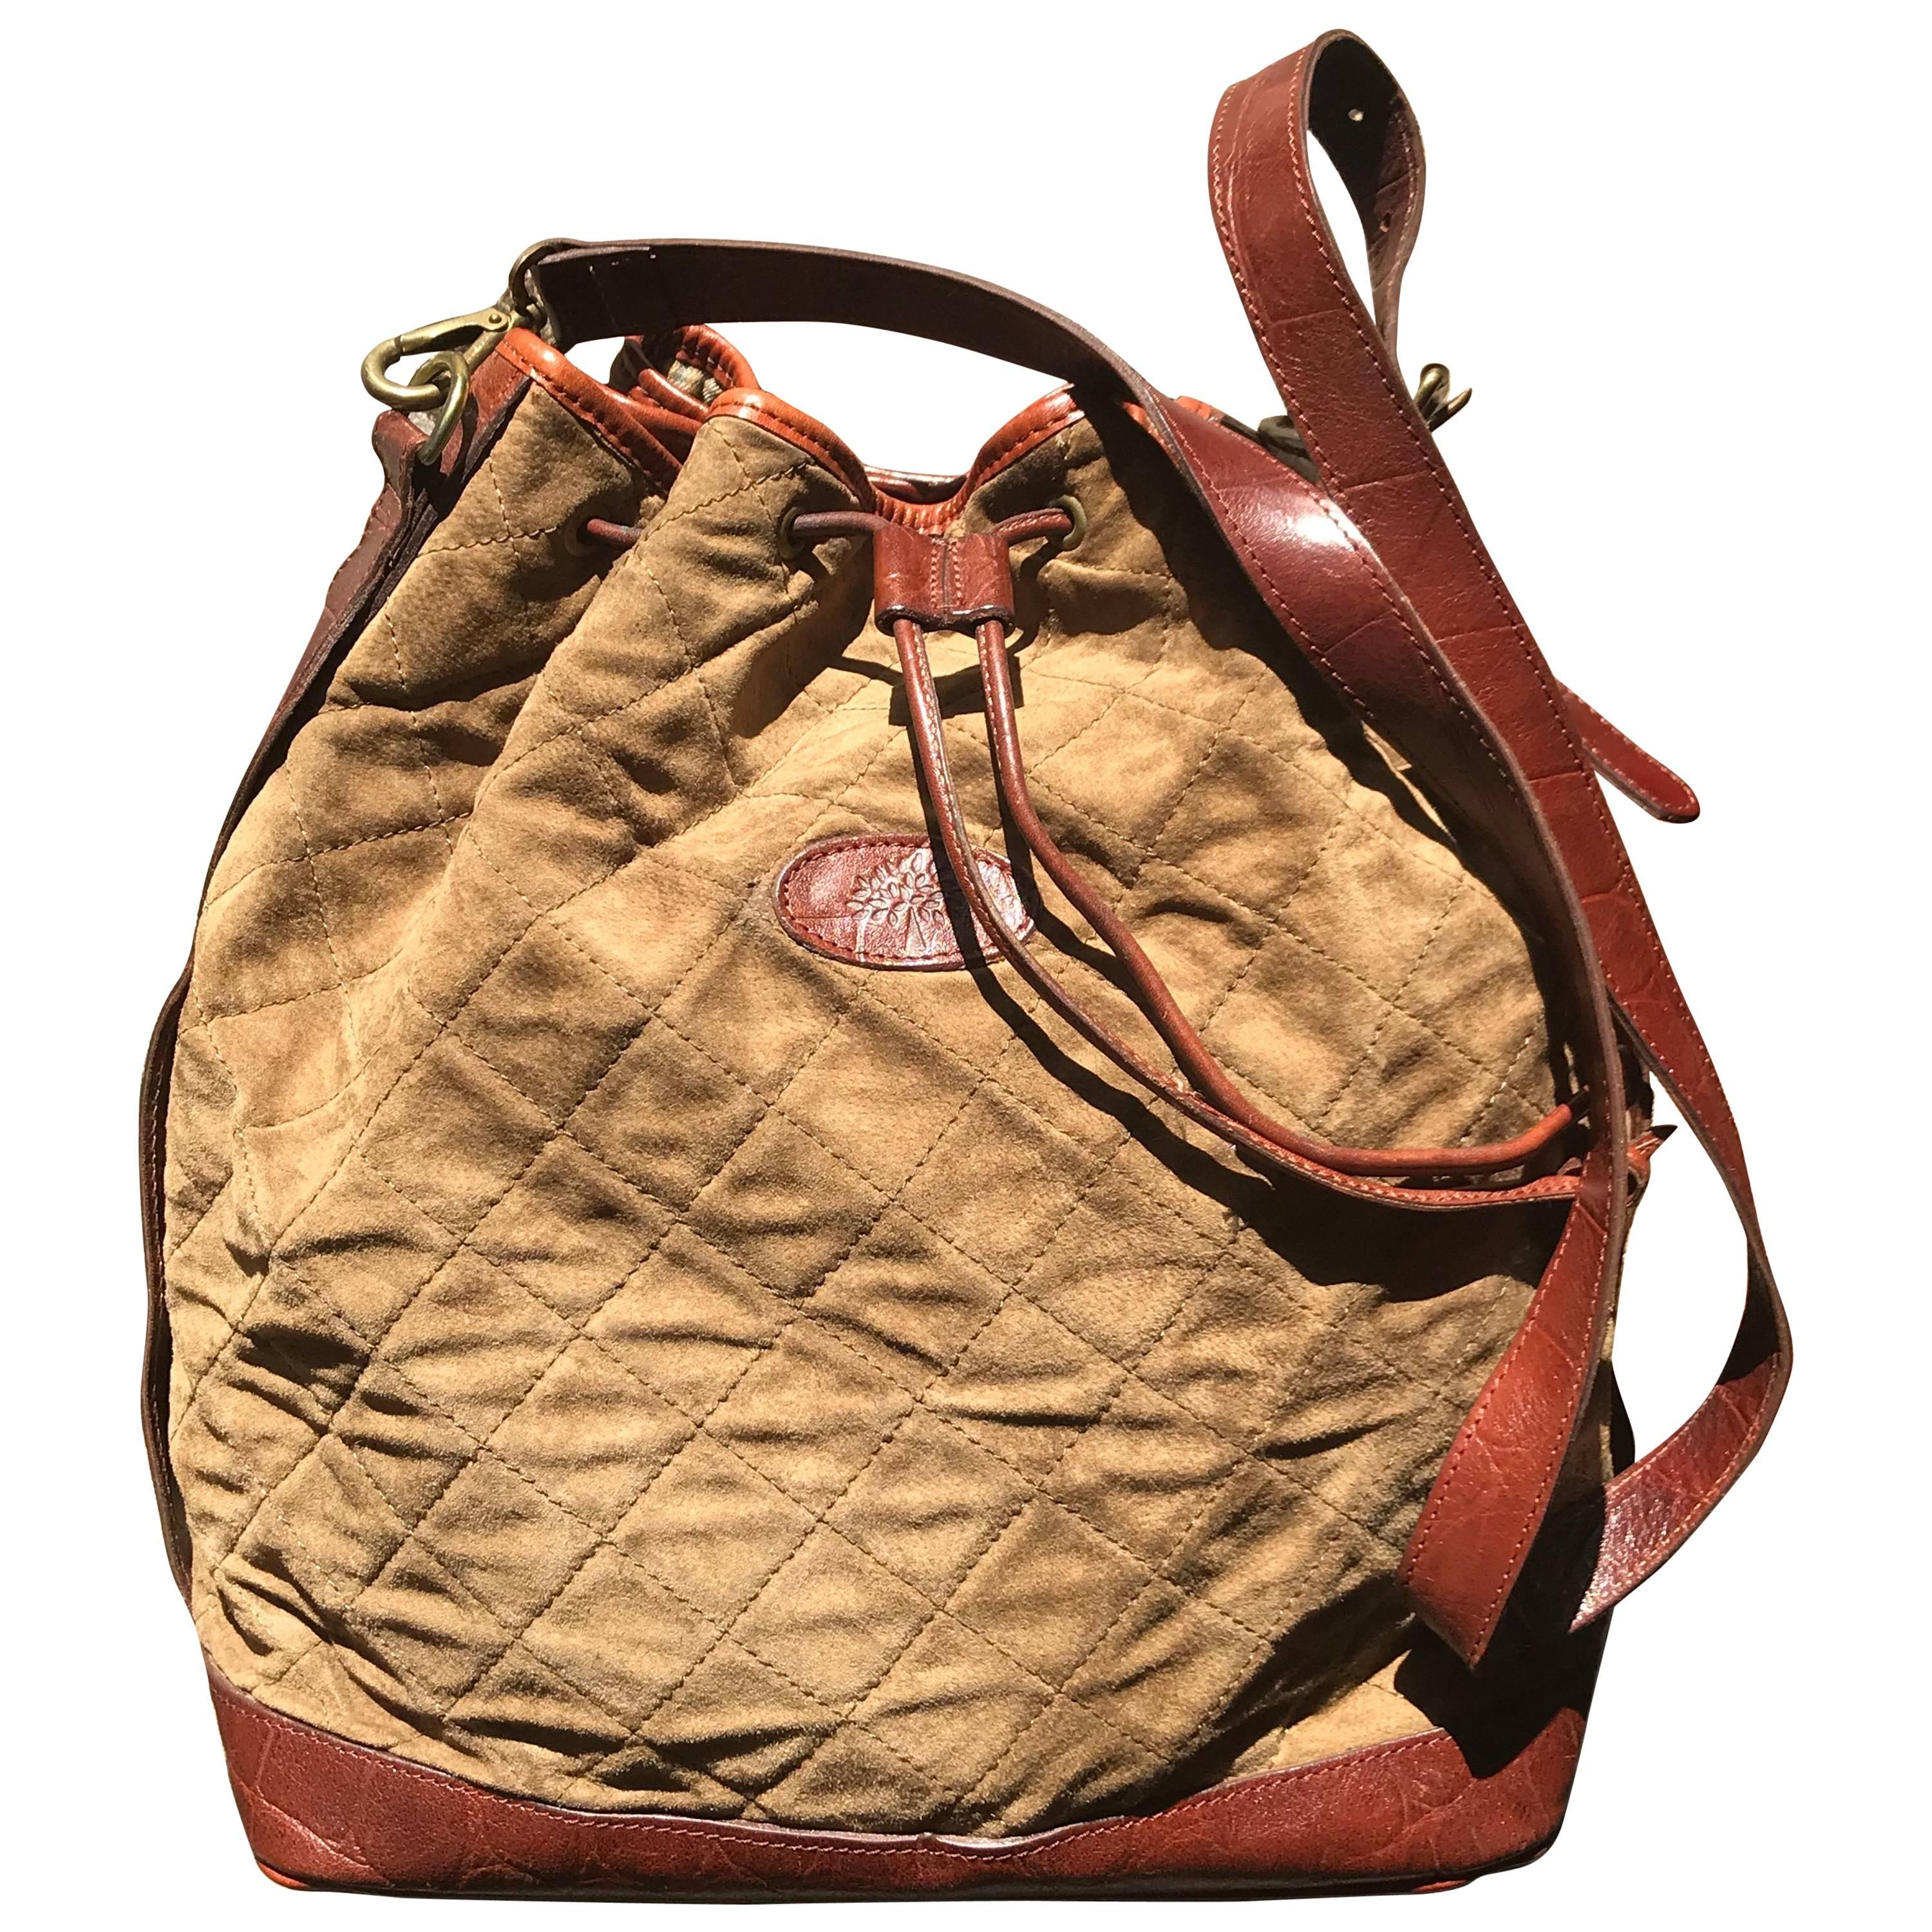 Vintage Mulberry brown khaki quilted suede leather bucket hobo bag. Roger Saul. For Sale